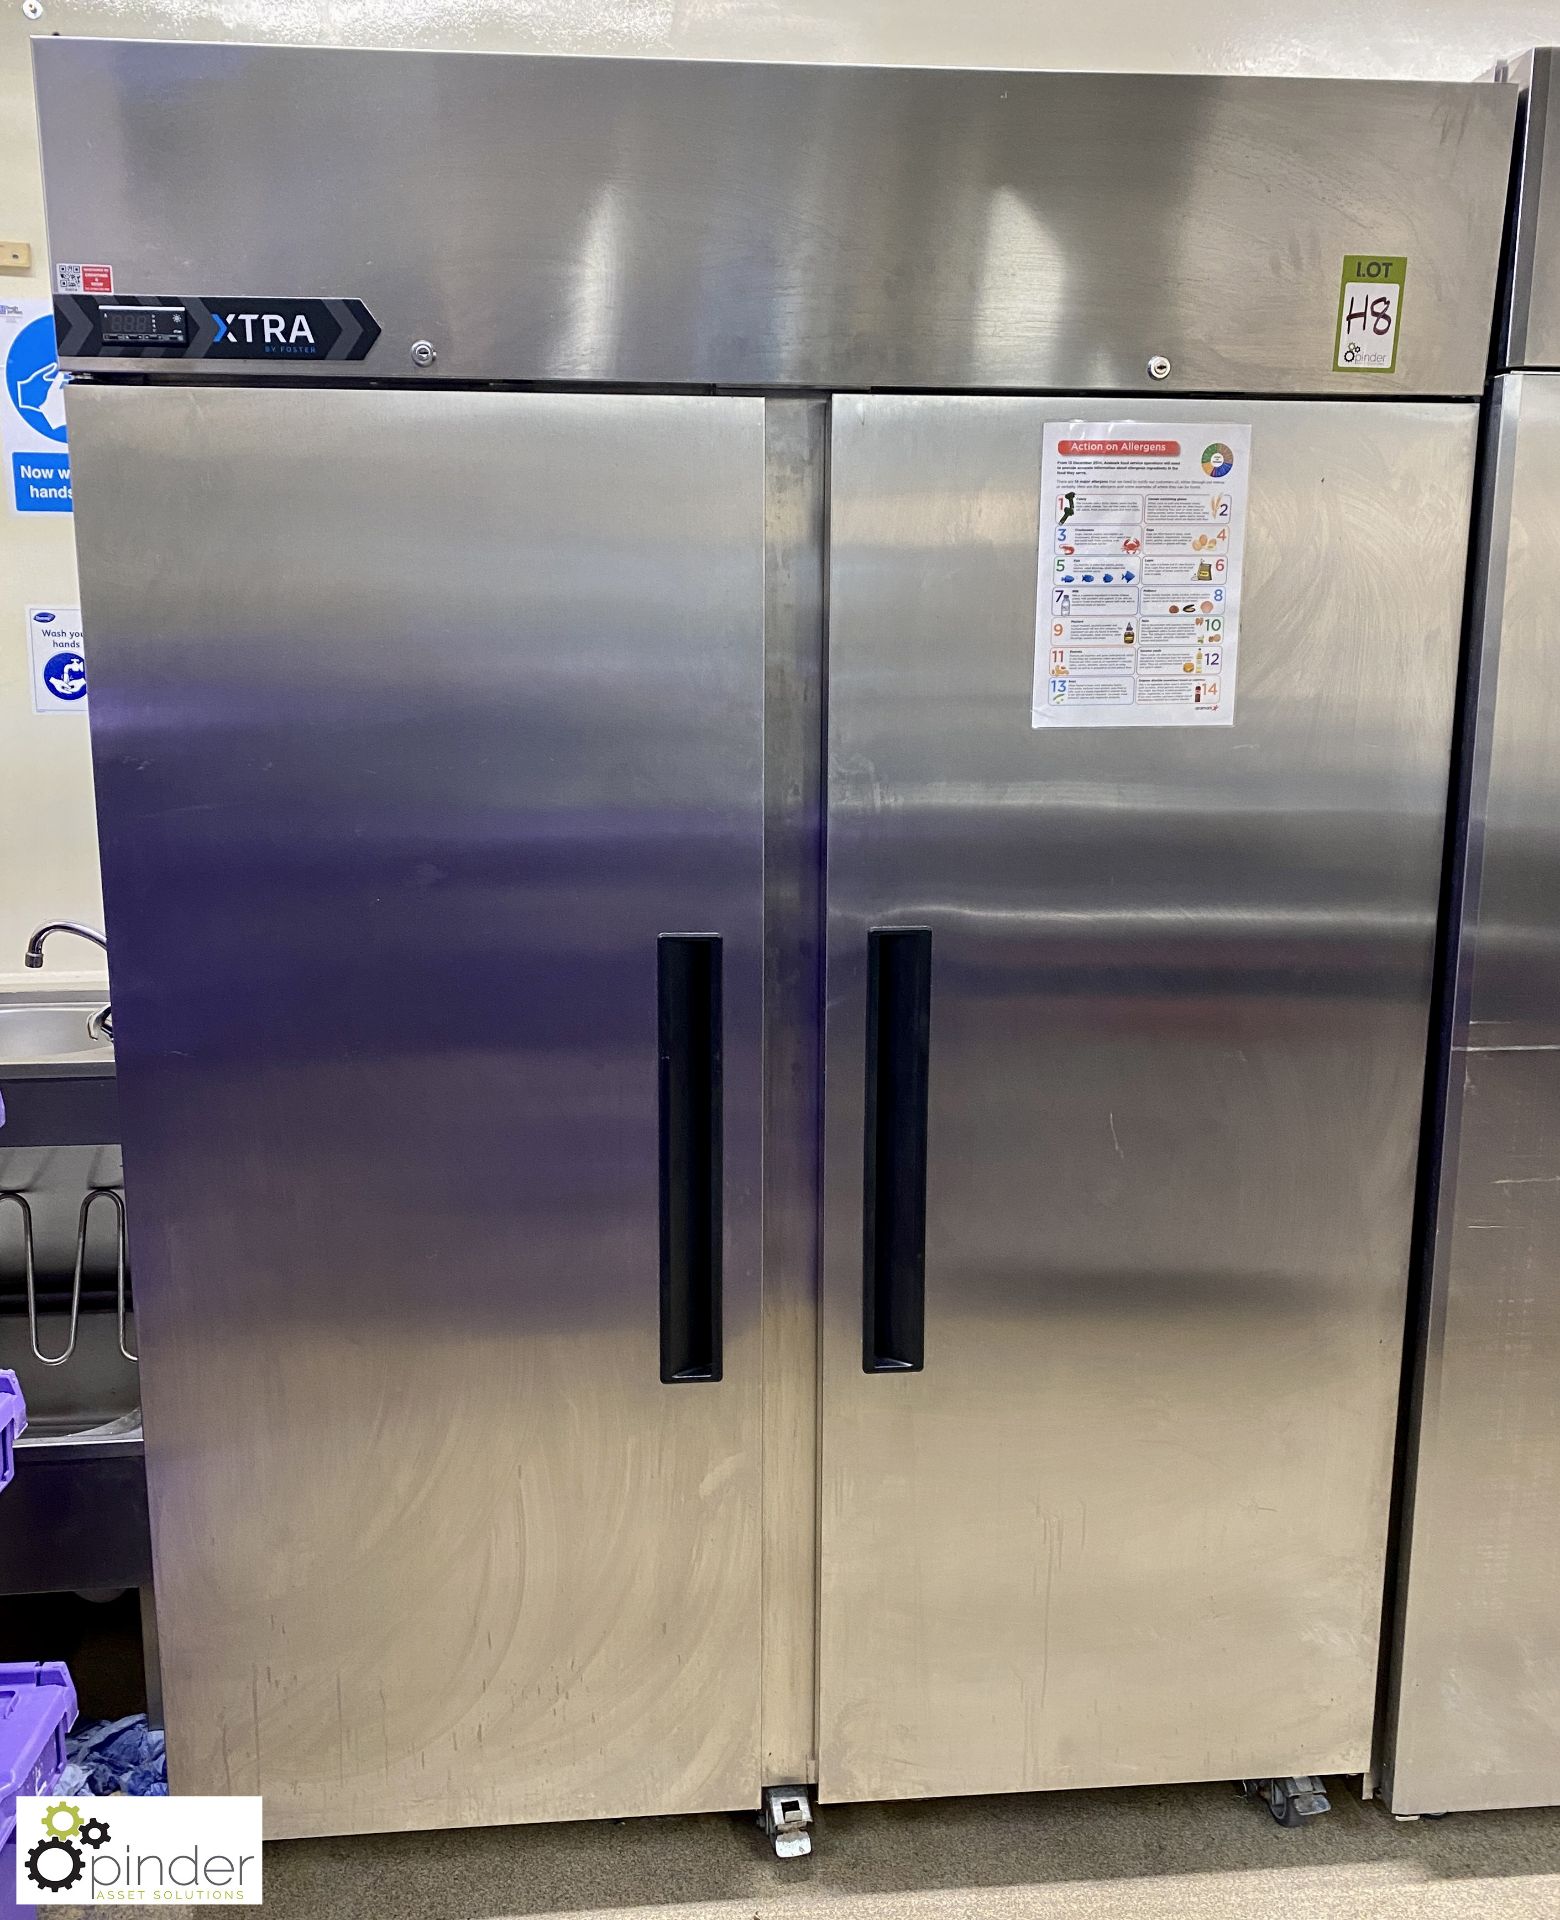 Extra by Foster 33-187 XR1300L stainless steel double door mobile Freezer, 240volts, 1380mm x